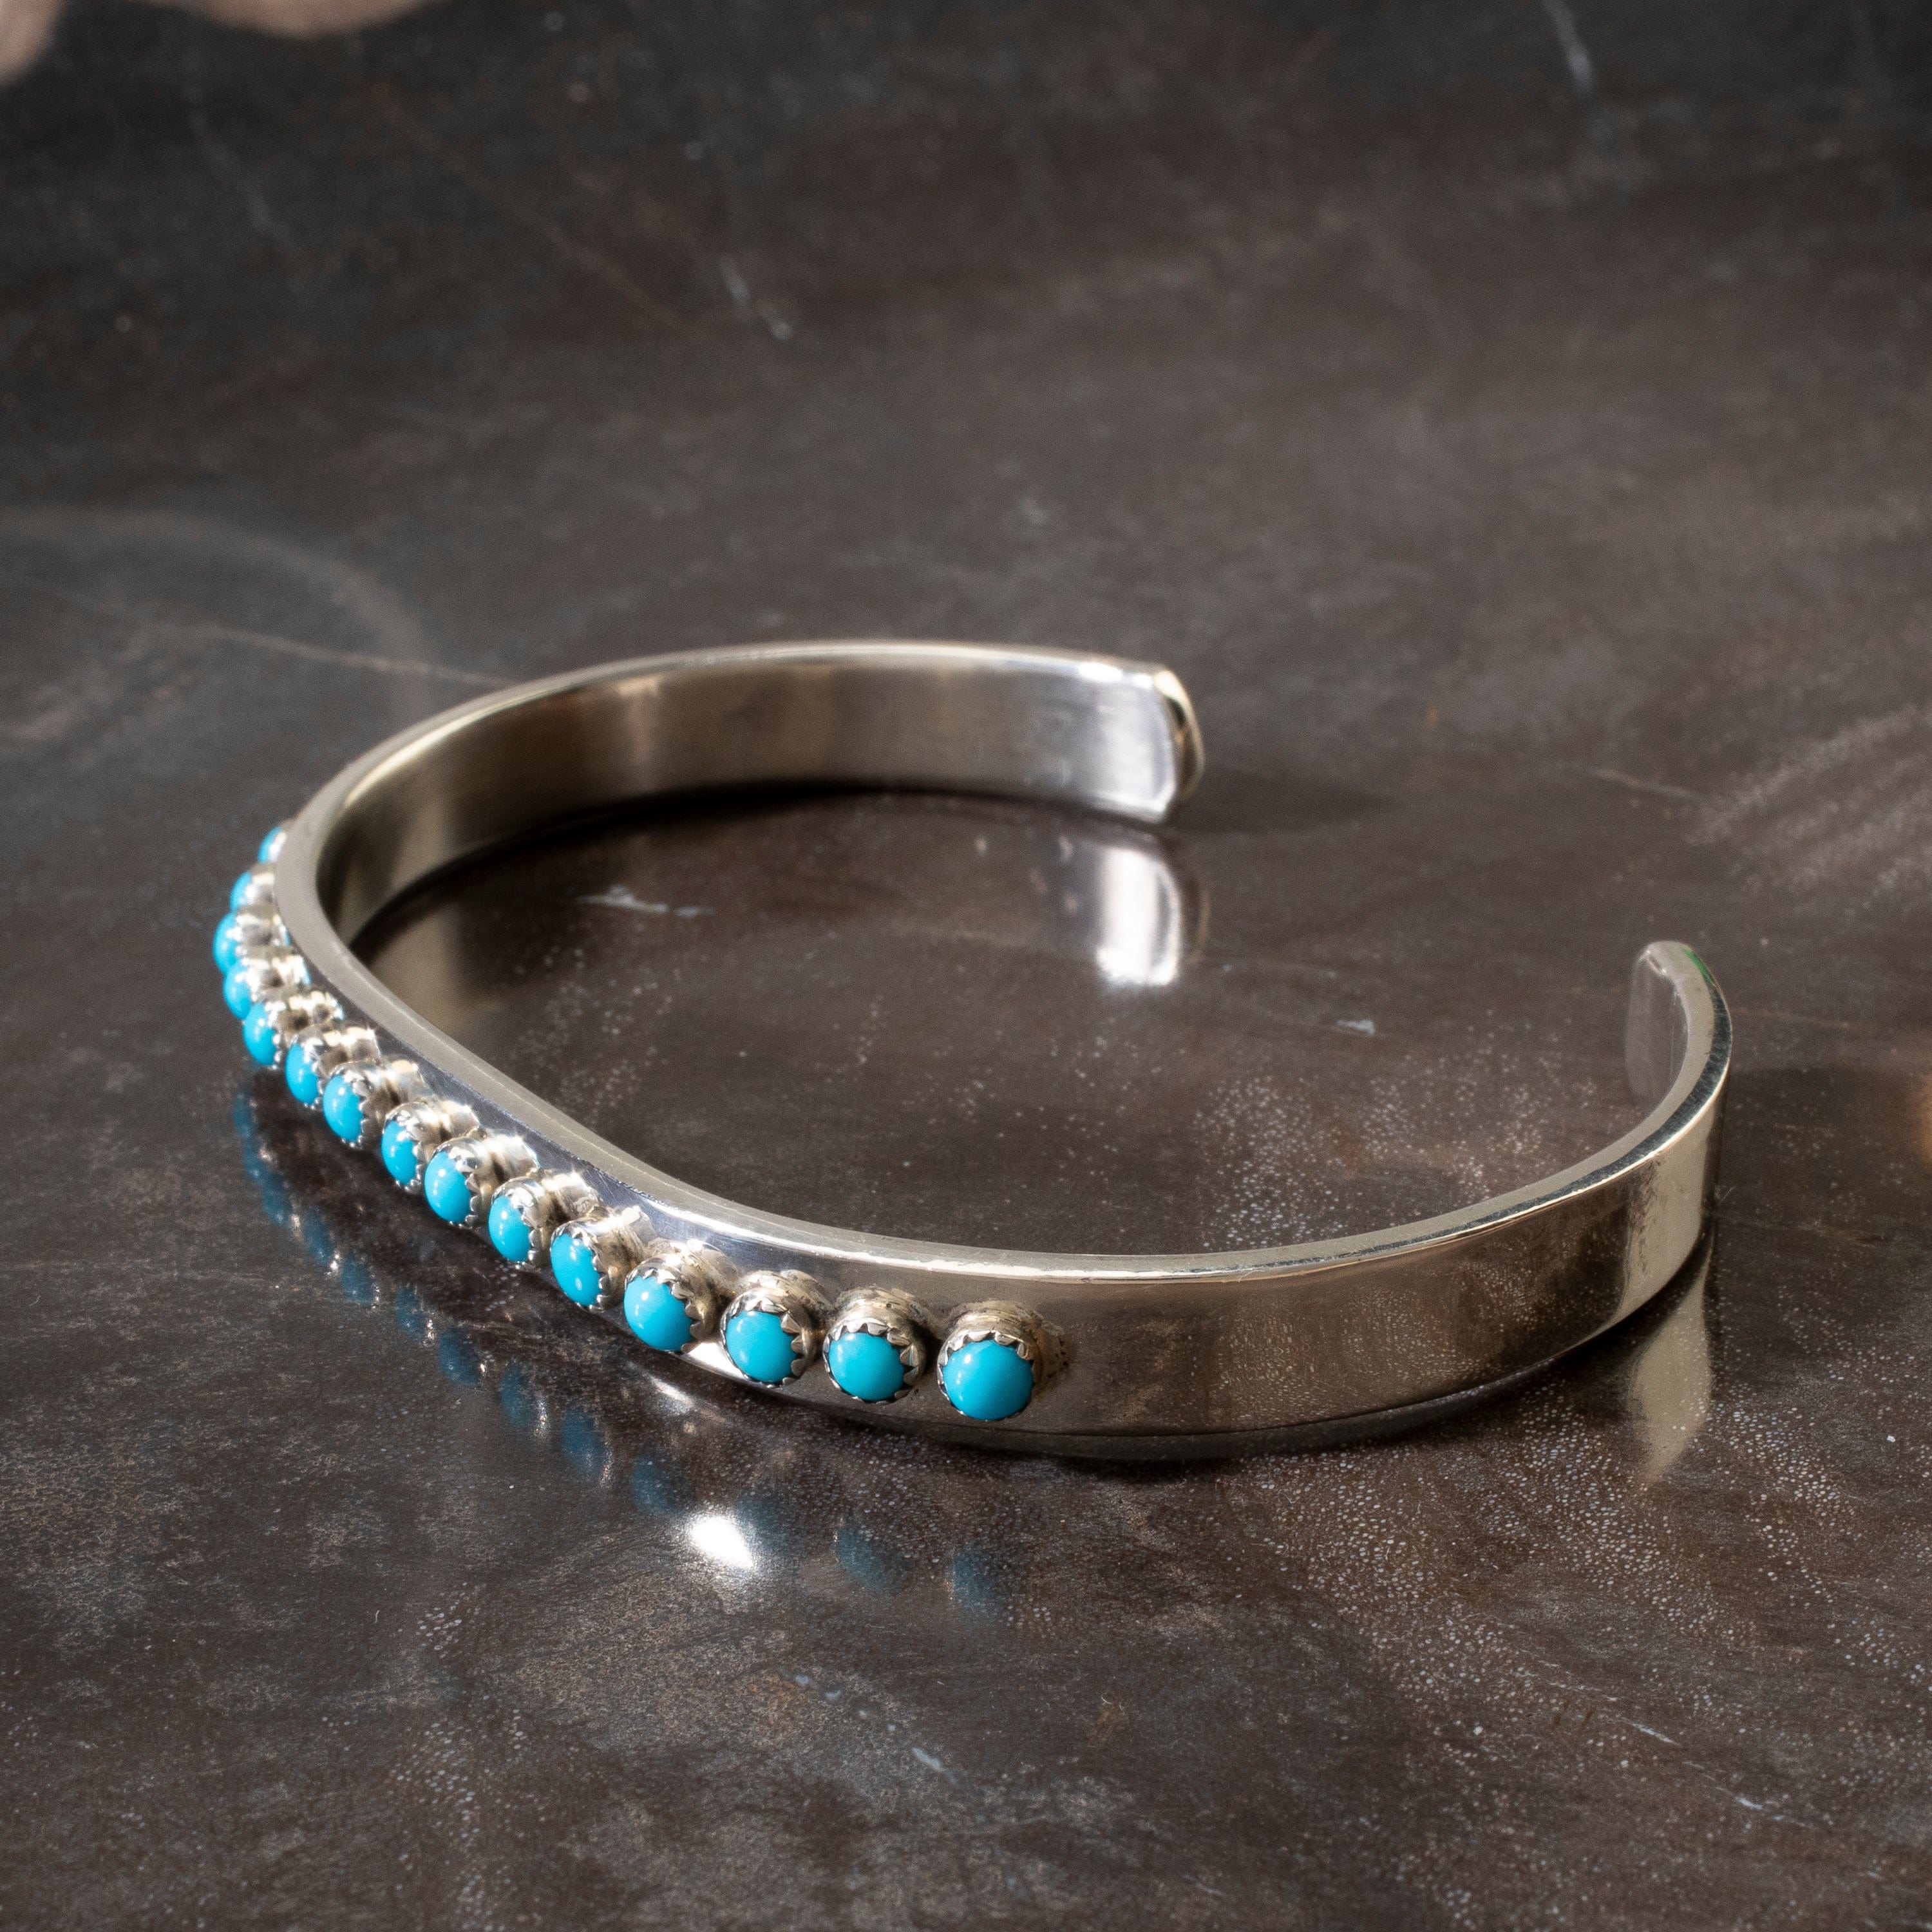 Kalifano Native American Jewelry Patrick Yazzie Navajo Sleeping Beauty Turquoise USA Native American Made 925 Sterling Silver Cuff NAB700.002